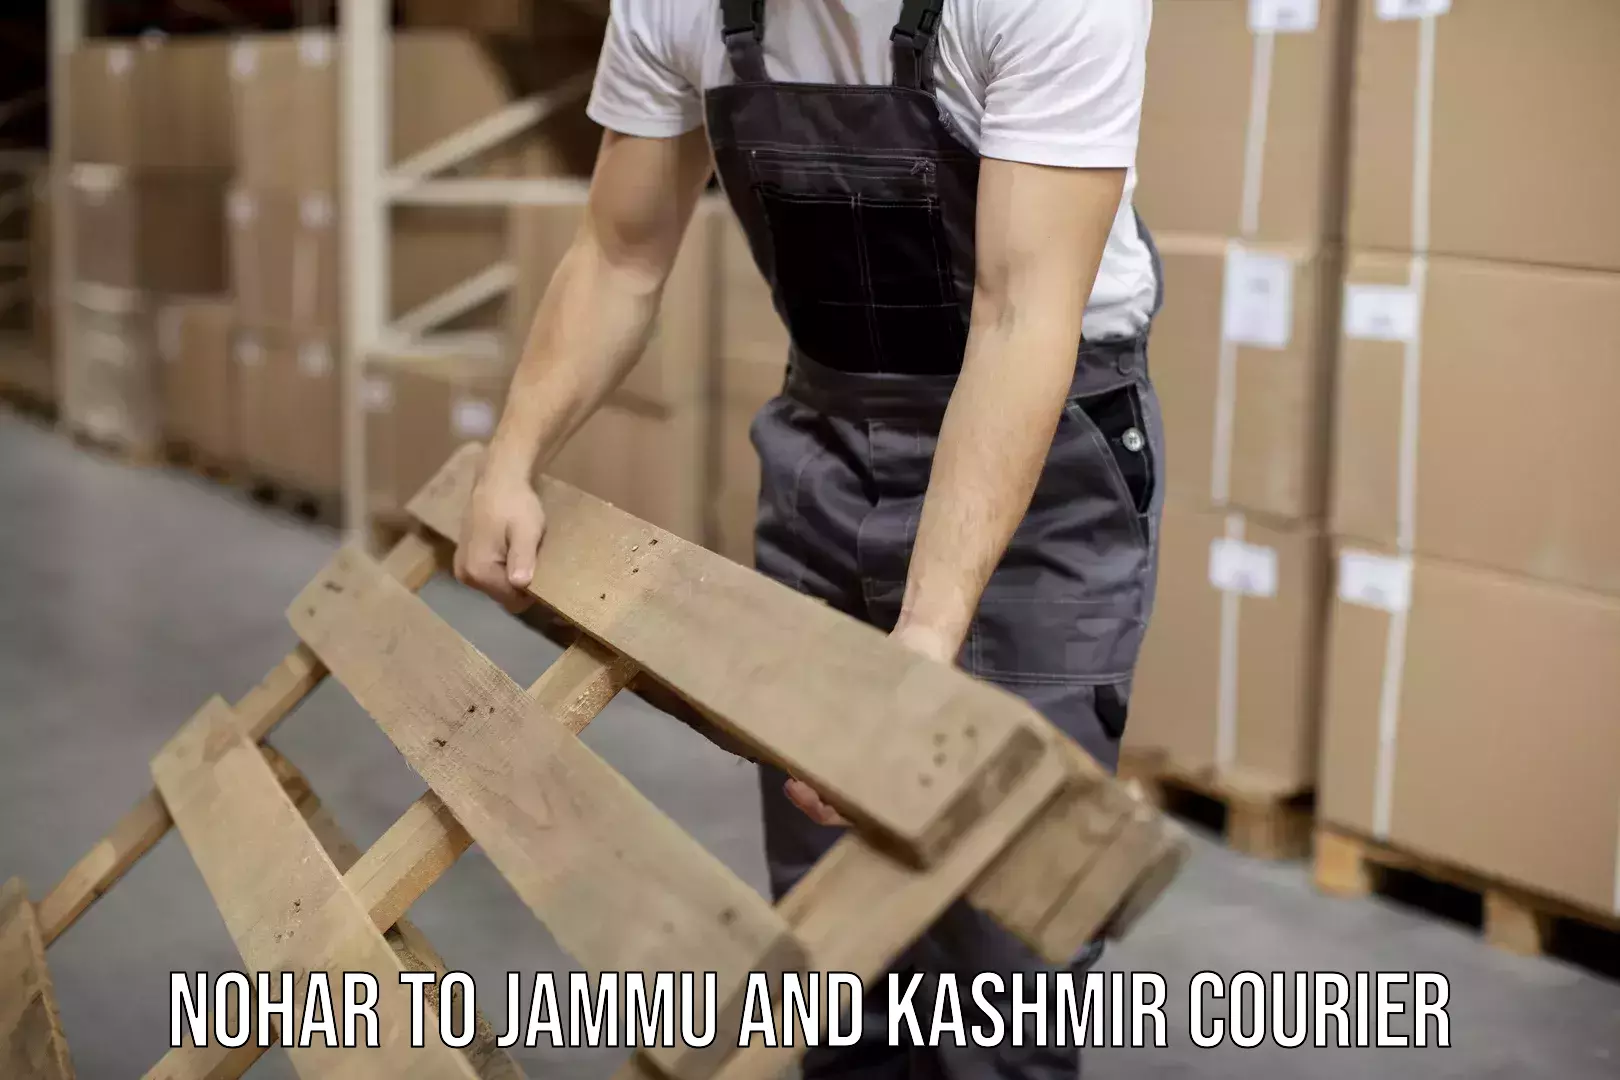 International courier networks Nohar to Jammu and Kashmir